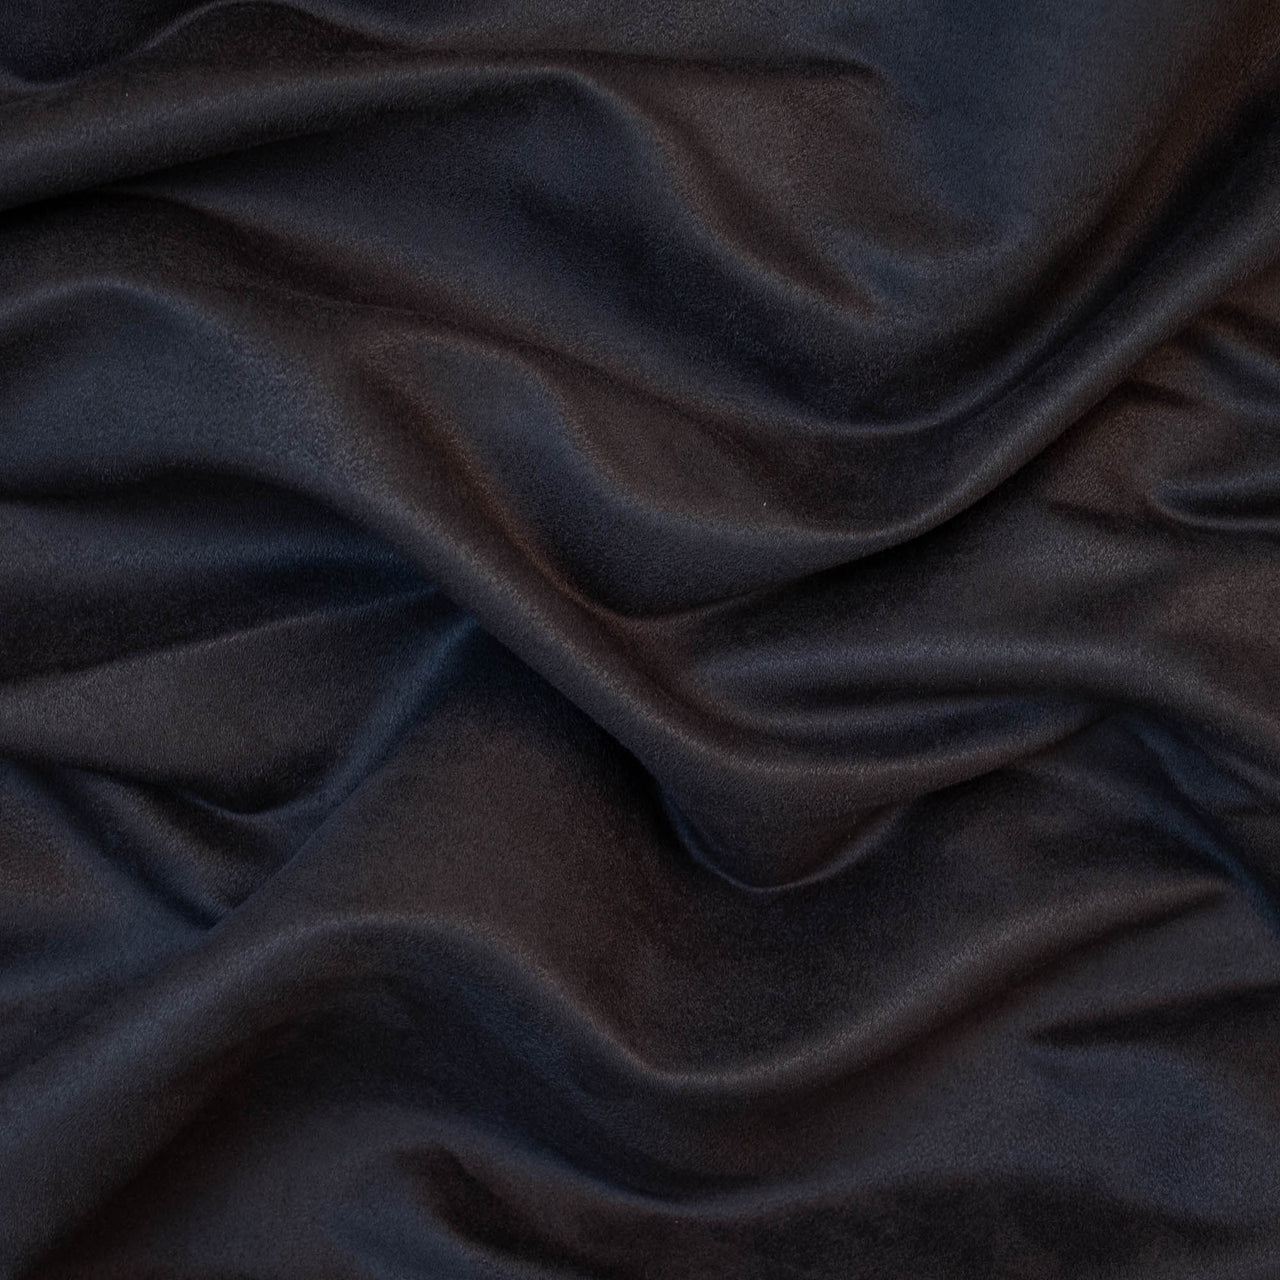 Charcoal - Premium Faux Suede for Car Interior, Interior Design, Upholstery & Soft Furnishings